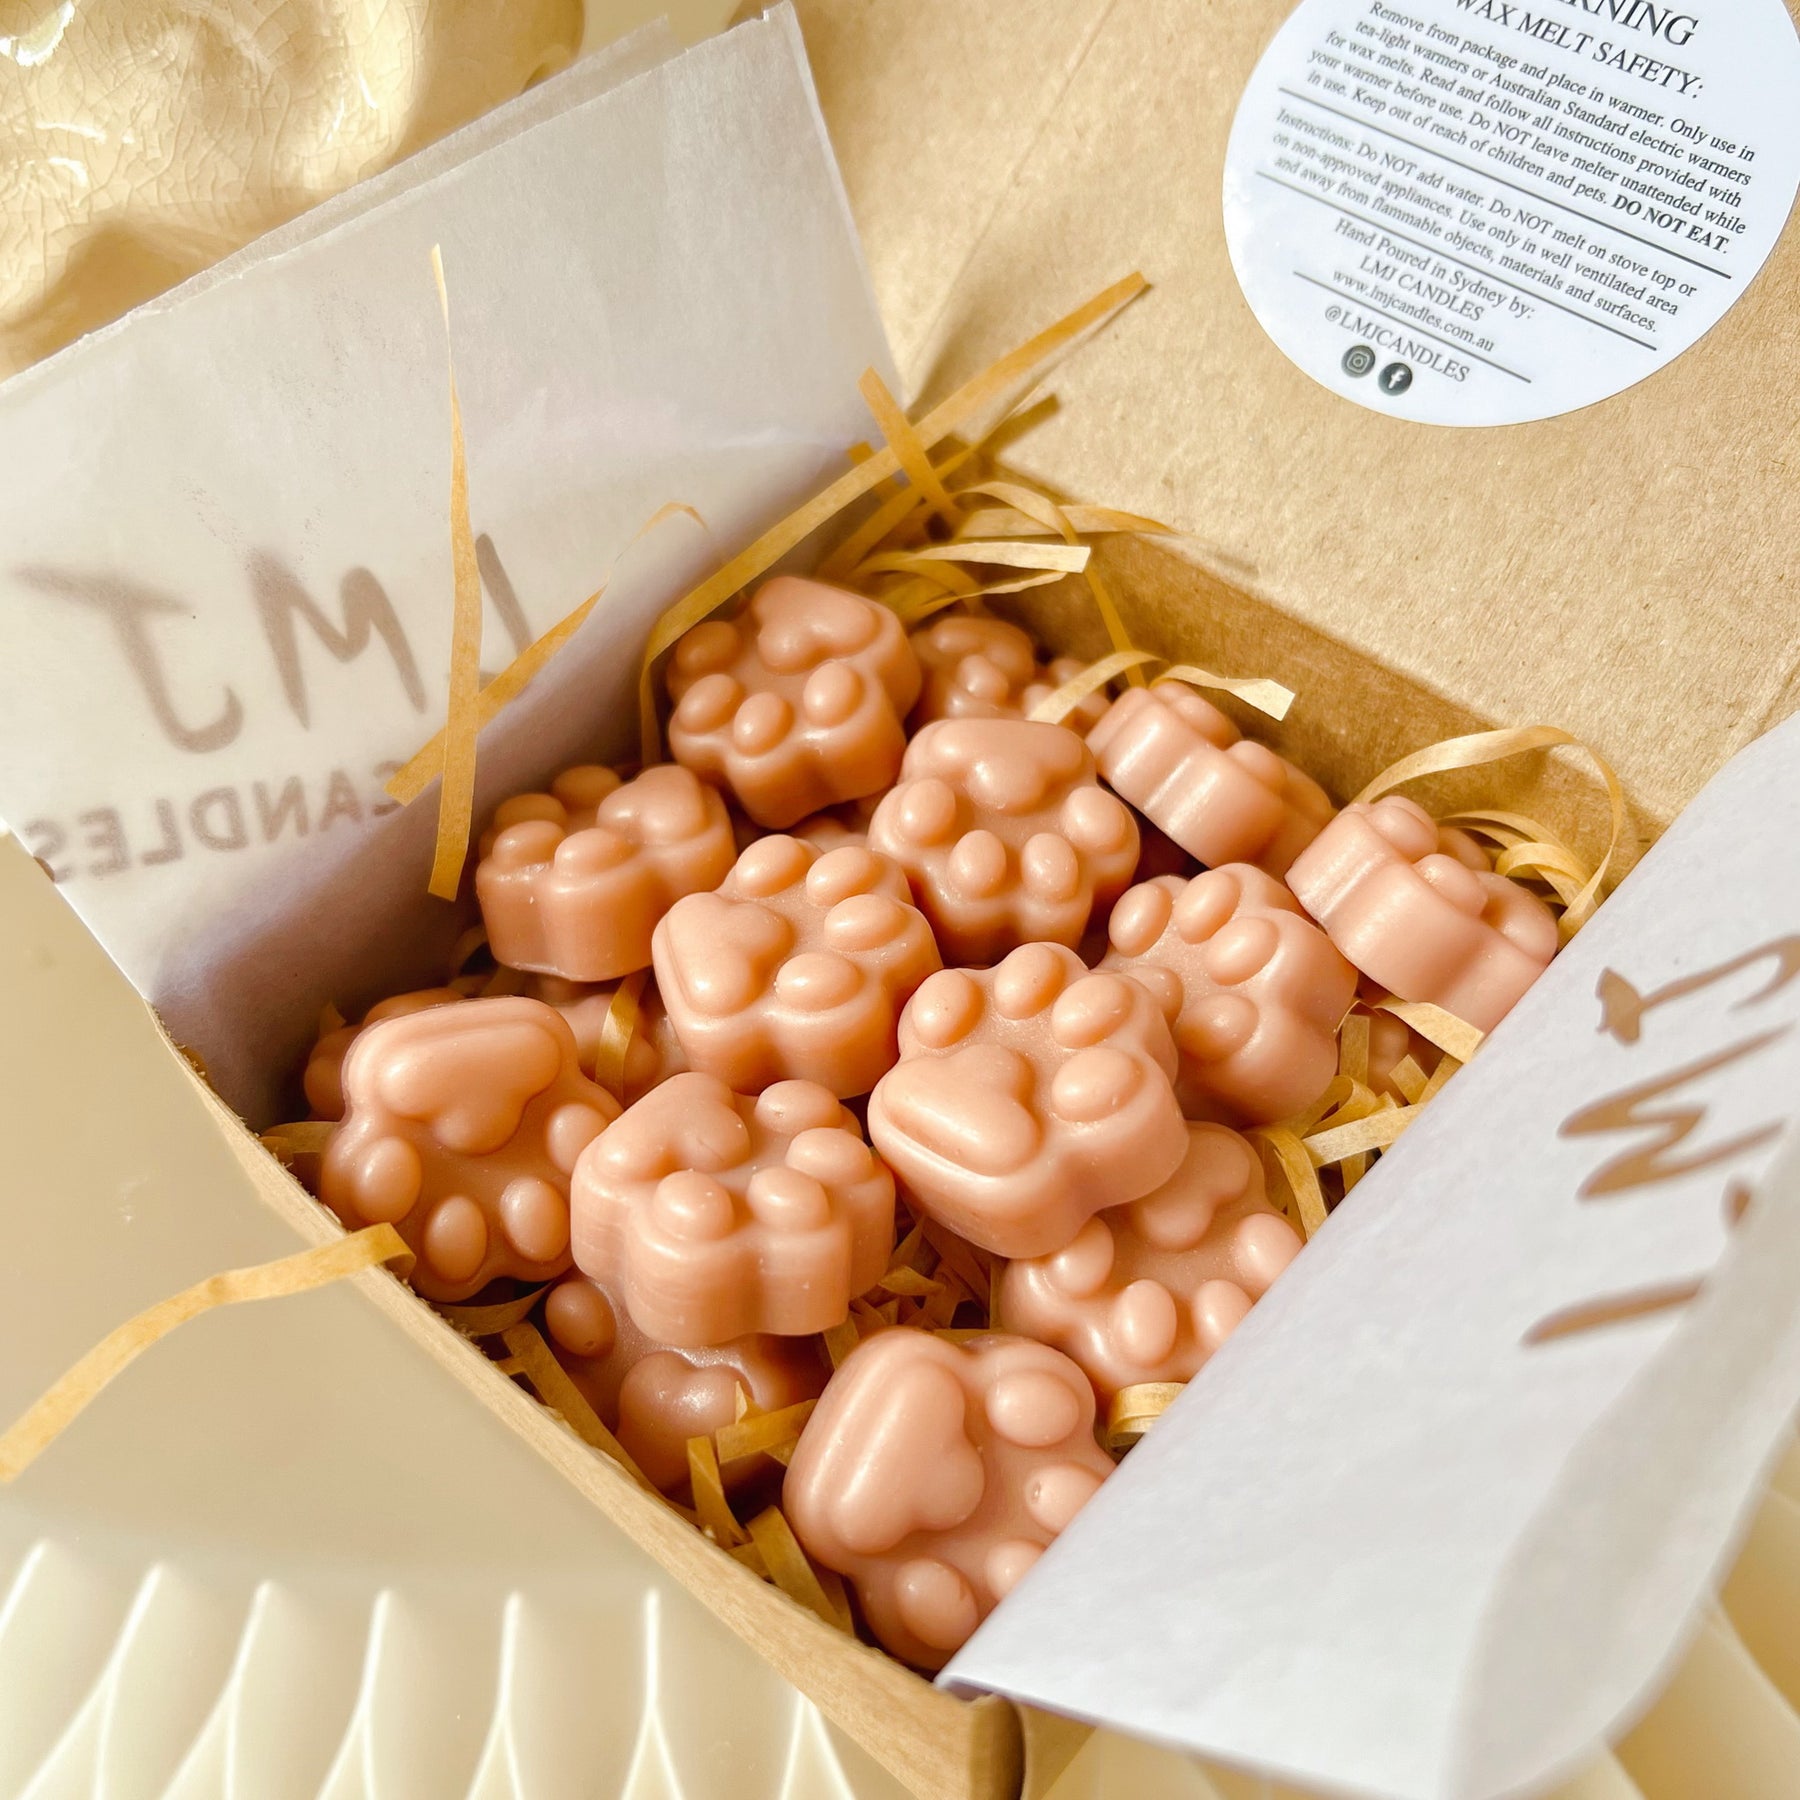 Eco-friendly, recyclable packaging of the paw-shaped soy wax melts from LMJ Candles, emphasizing sustainability.